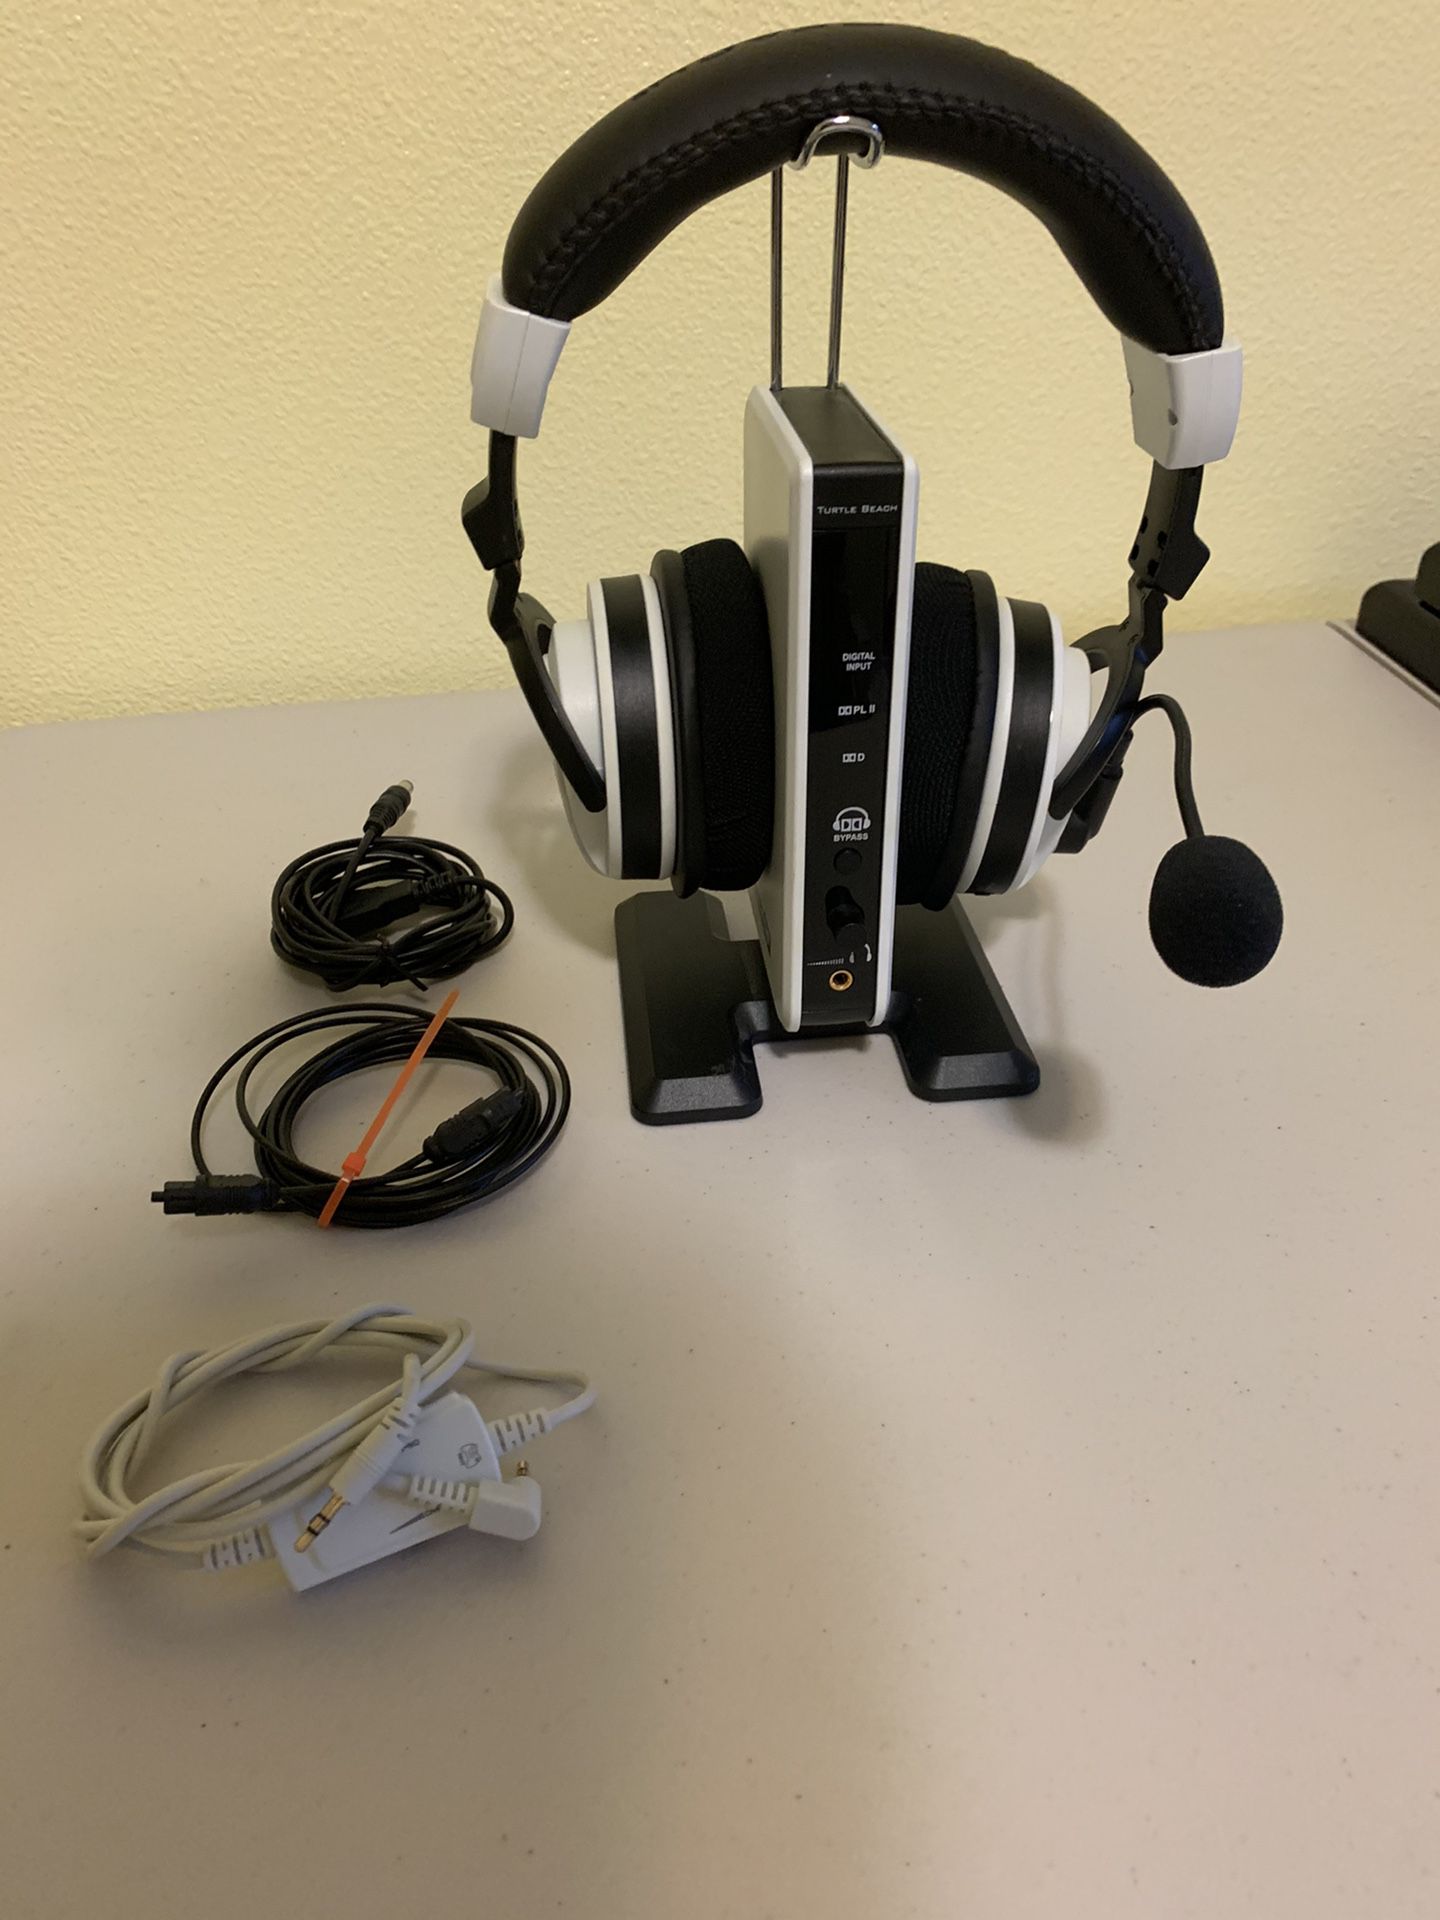 Turtle Beach Xbox Headset and Receiver model x41 rx